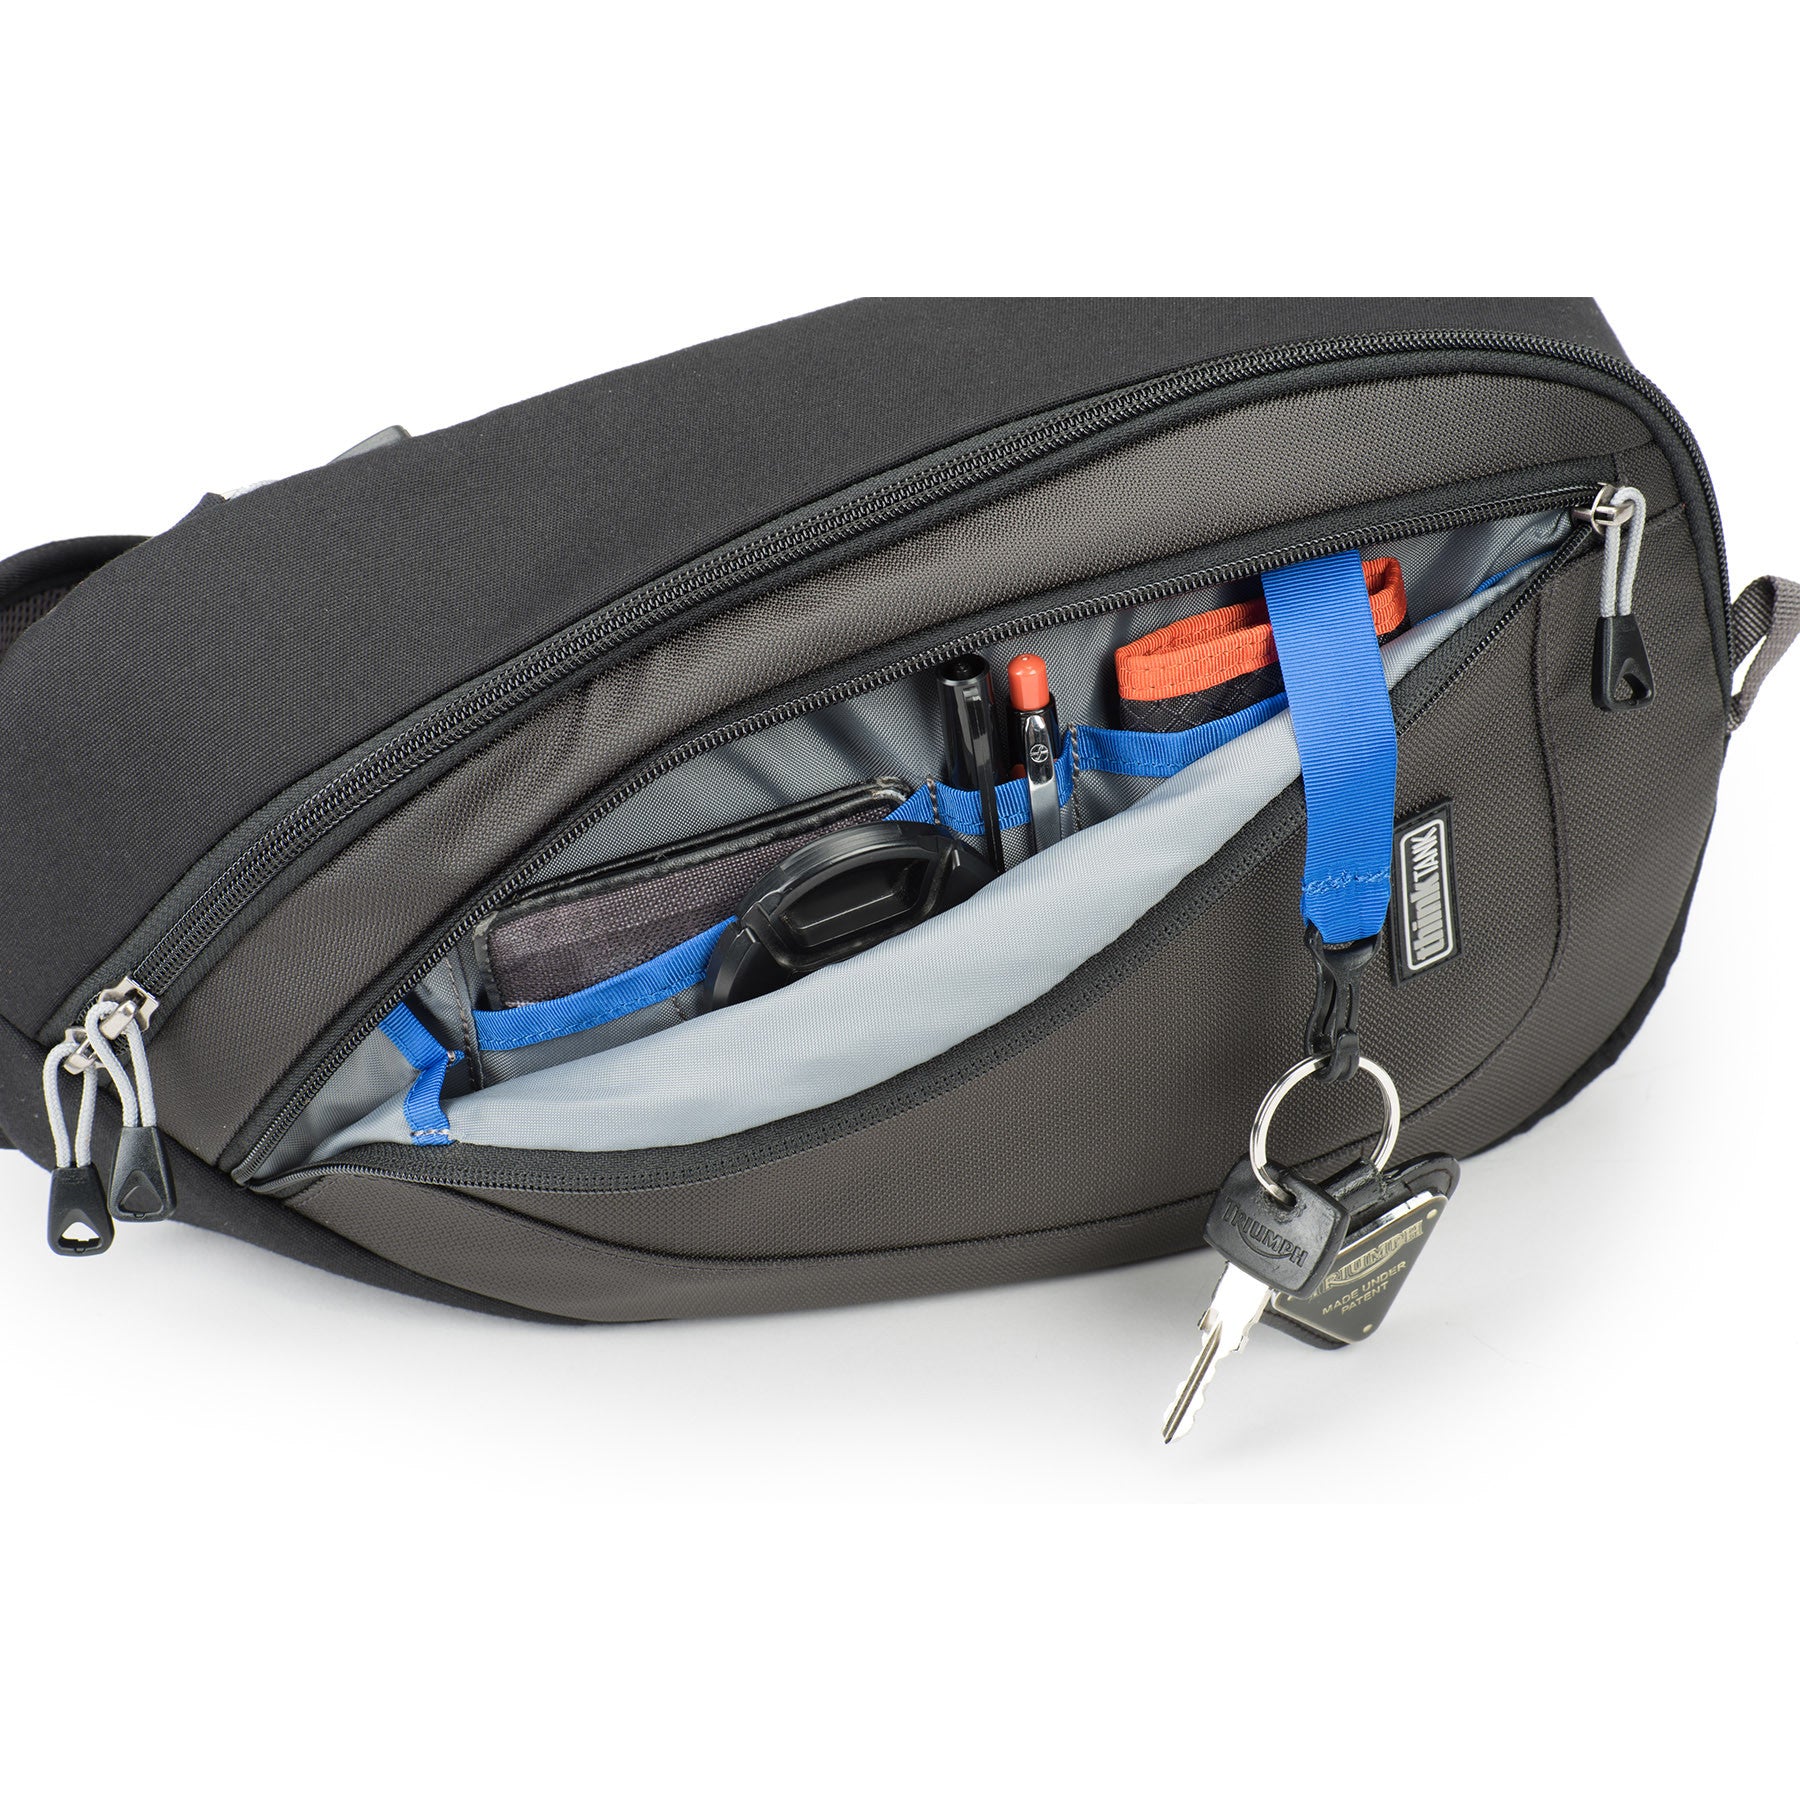 TurnStyle 20 Sling Bag - Easy rotation for rapid access to